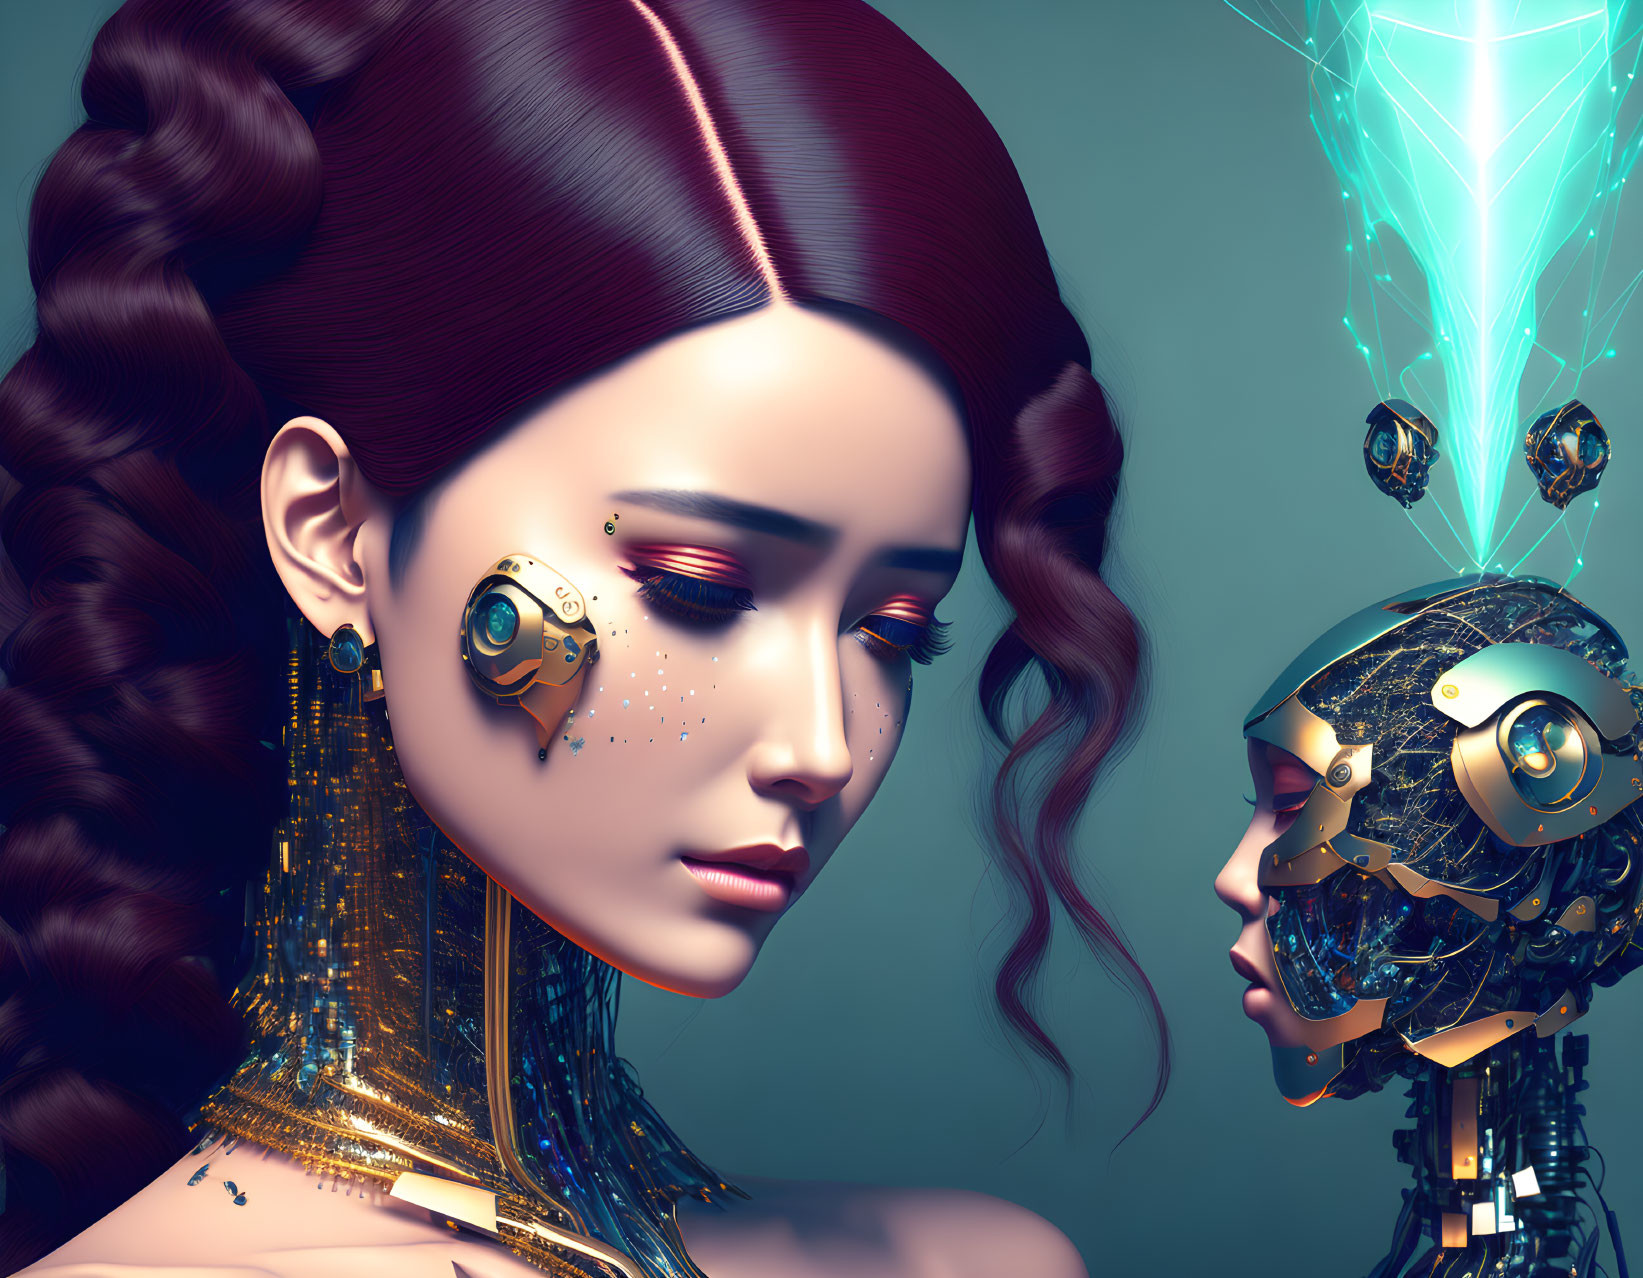 Futuristic digital art: Woman with cybernetic enhancements and opening robotic head.